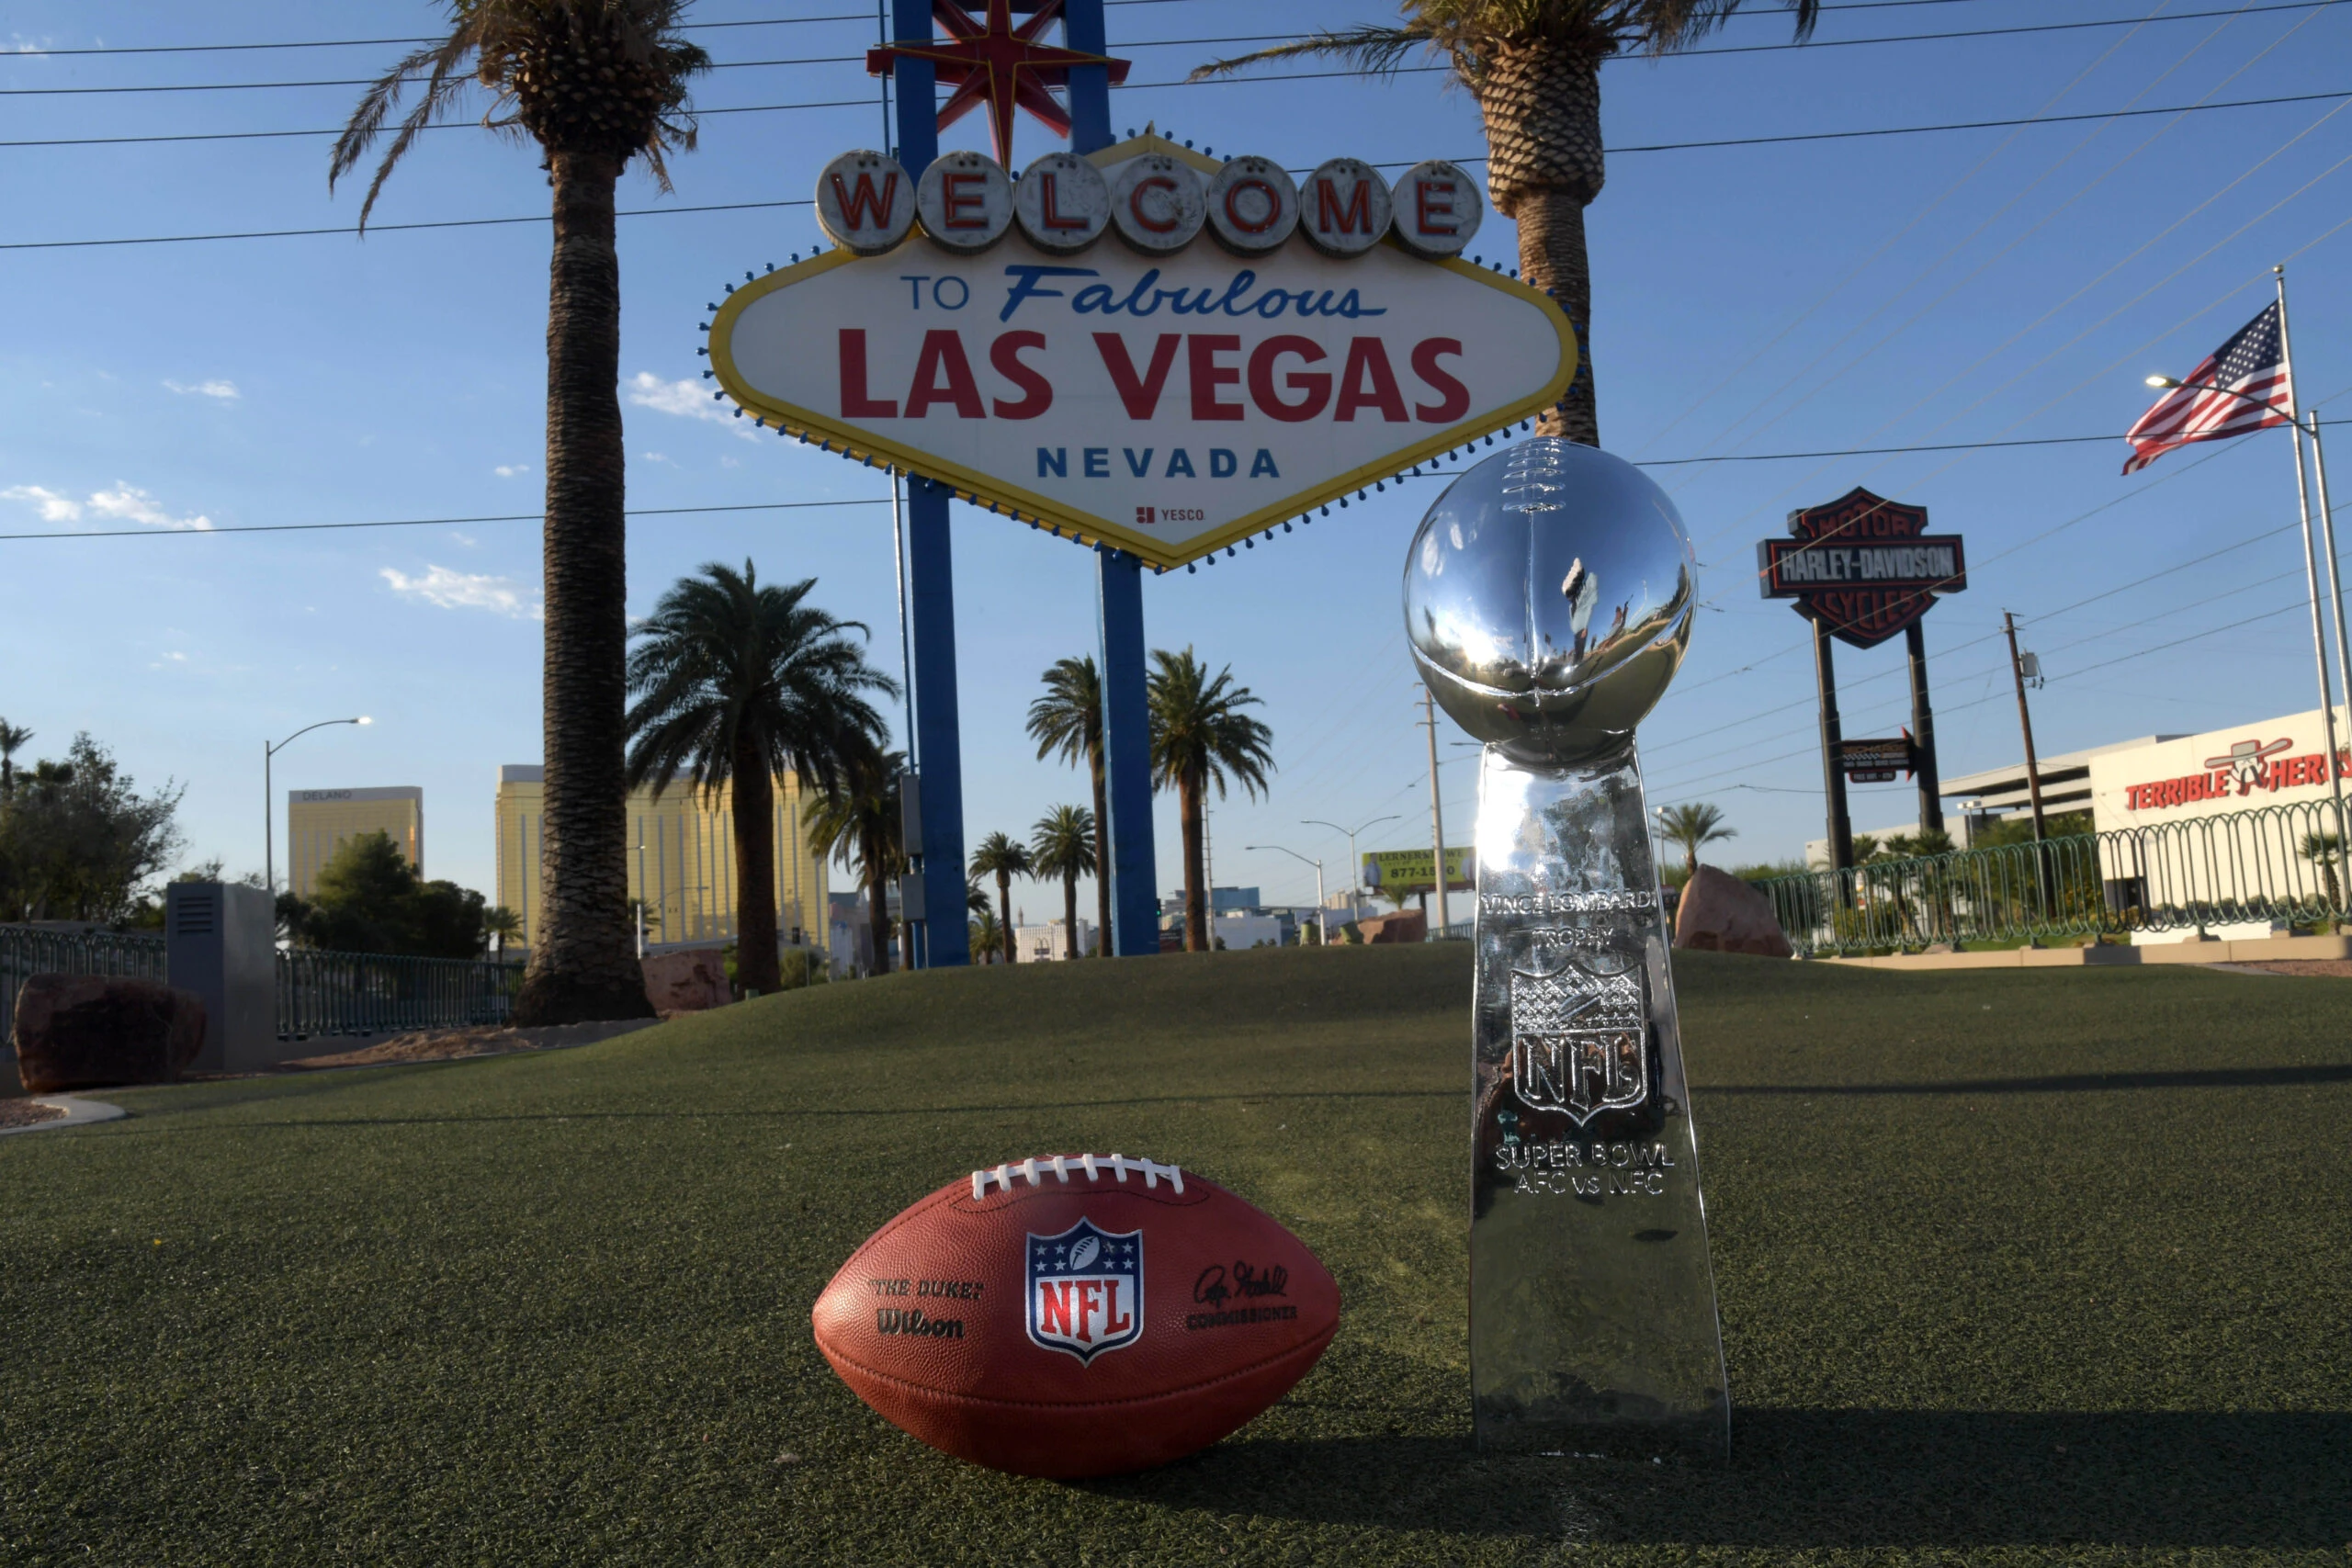 Las Vegas betting reputation as party capital on Super Bowl - The